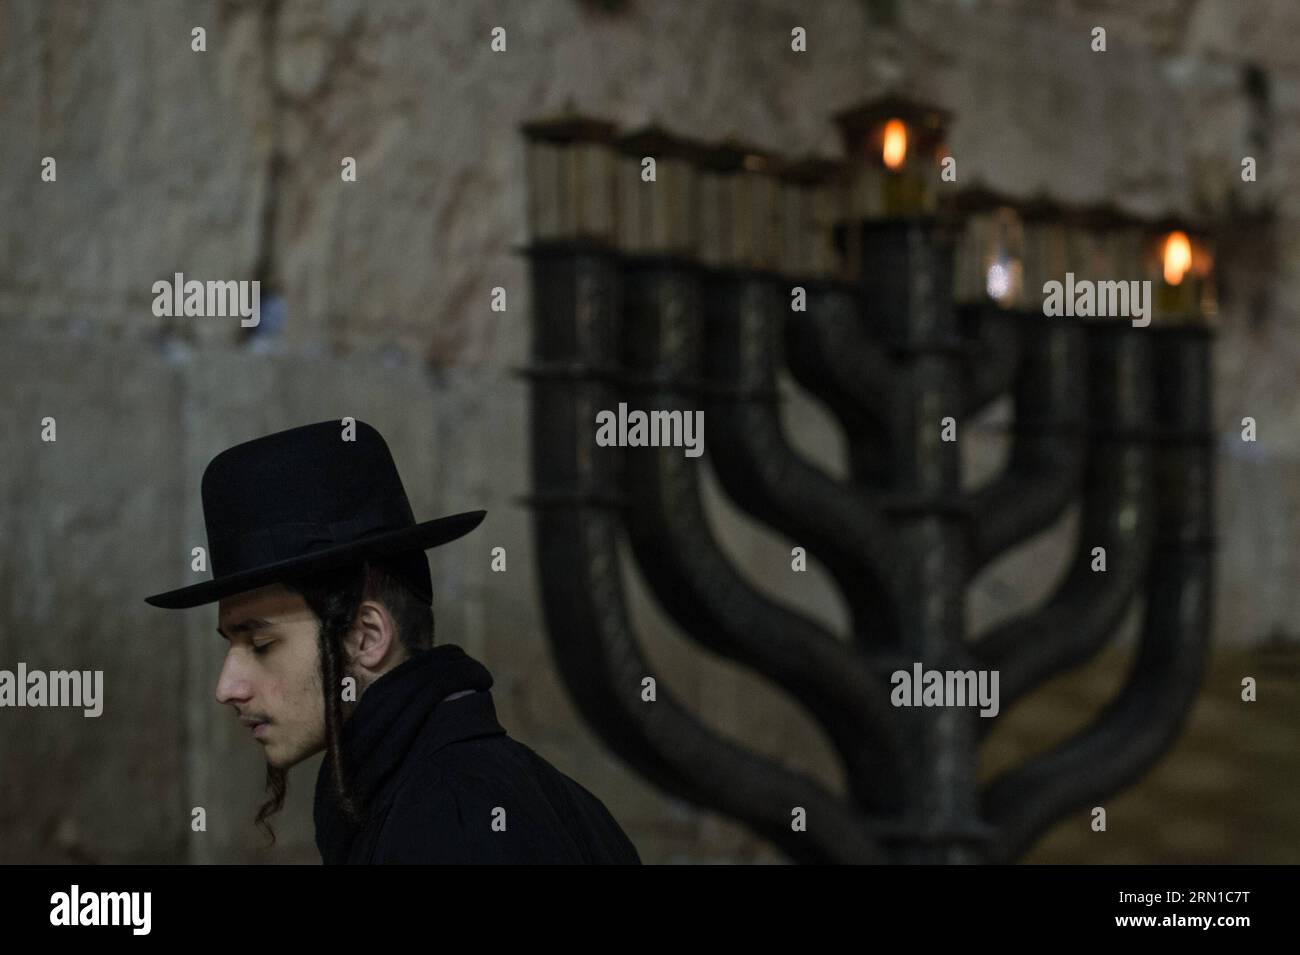 JERUSALEM, Dec. 16, 2014 -- An Ultra-Orthodox Jewish man prays to mark Hanukkah in front of a large-sized Hannukiya at the Western Wall in the Old City of Jerusalem, on Dec. 16, 2014. Hanukkah, also known as the Festival of Lights and Feast of Dedication, is an eight-day Jewish holiday commemorating the rededication of the Holy Temple (the Second Temple) in Jerusalem at the time of the Maccabean Revolt against the Seleucid Empire of the 2nd Century B.C. Hanukkah is observed for eight nights and days, starting on the 25th day of Kislev according to the Hebrew calendar, which may occur at any ti Stock Photo